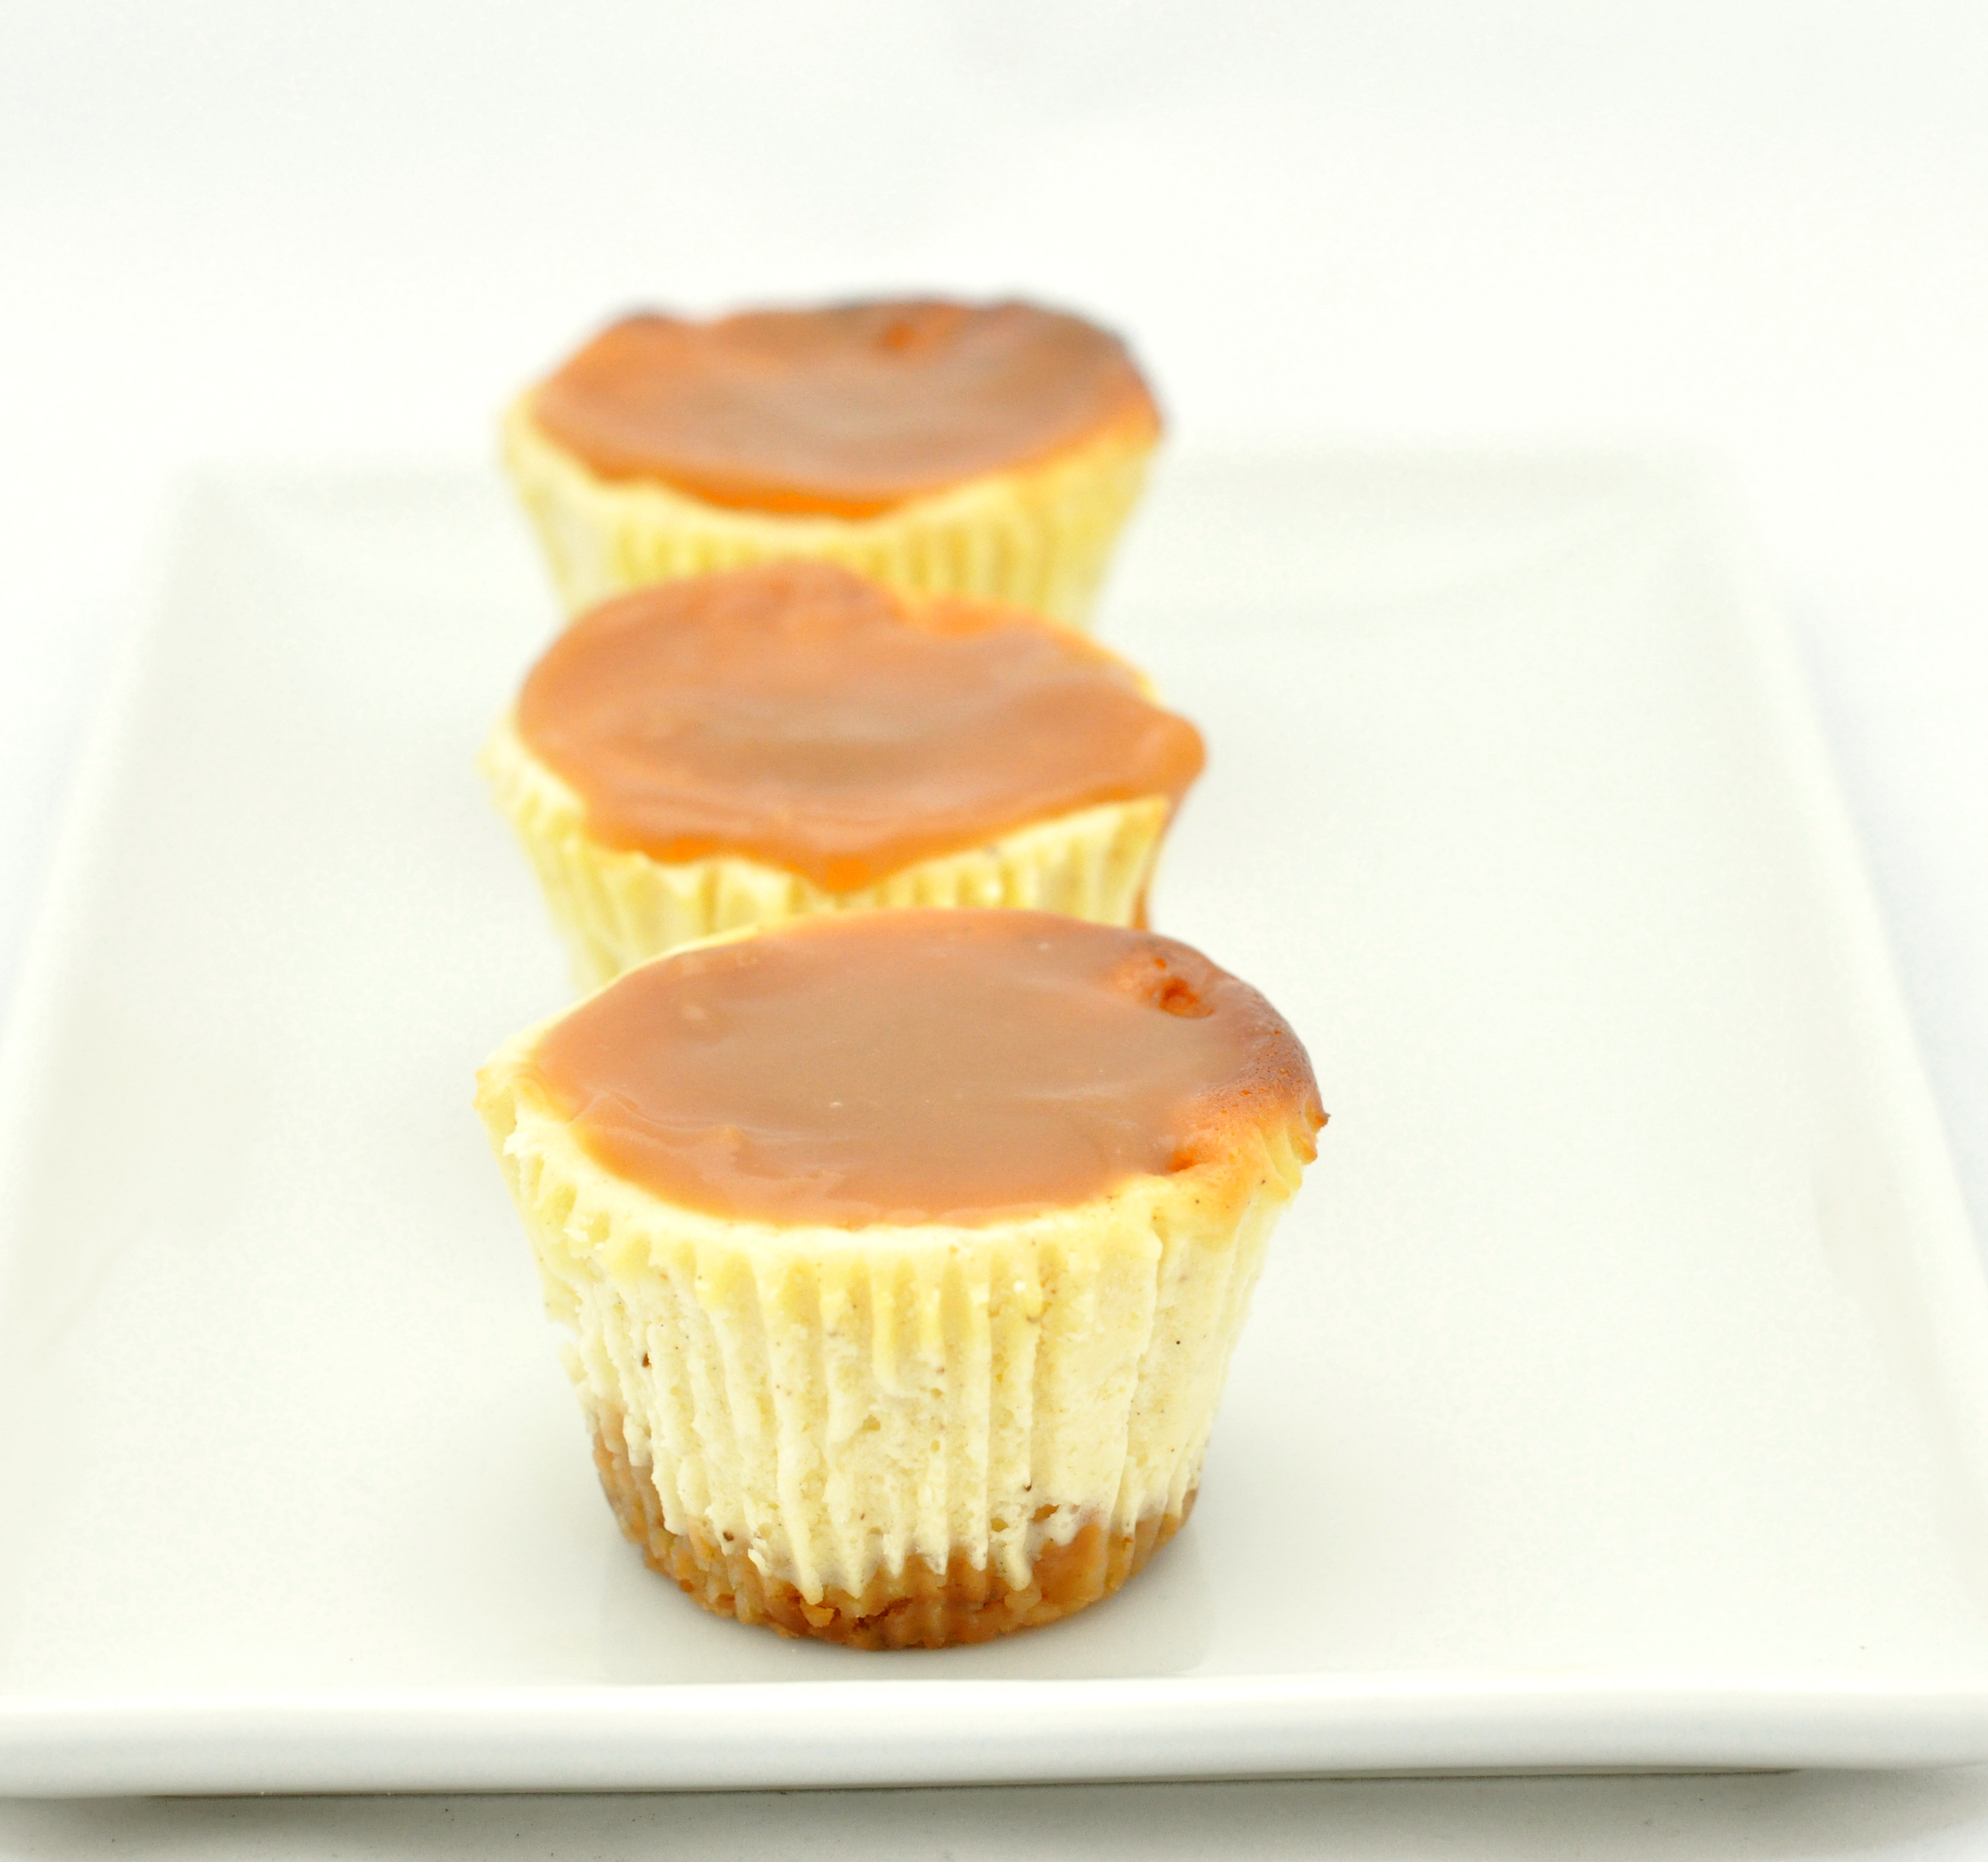 Mini cheesecakes with caramel sauce